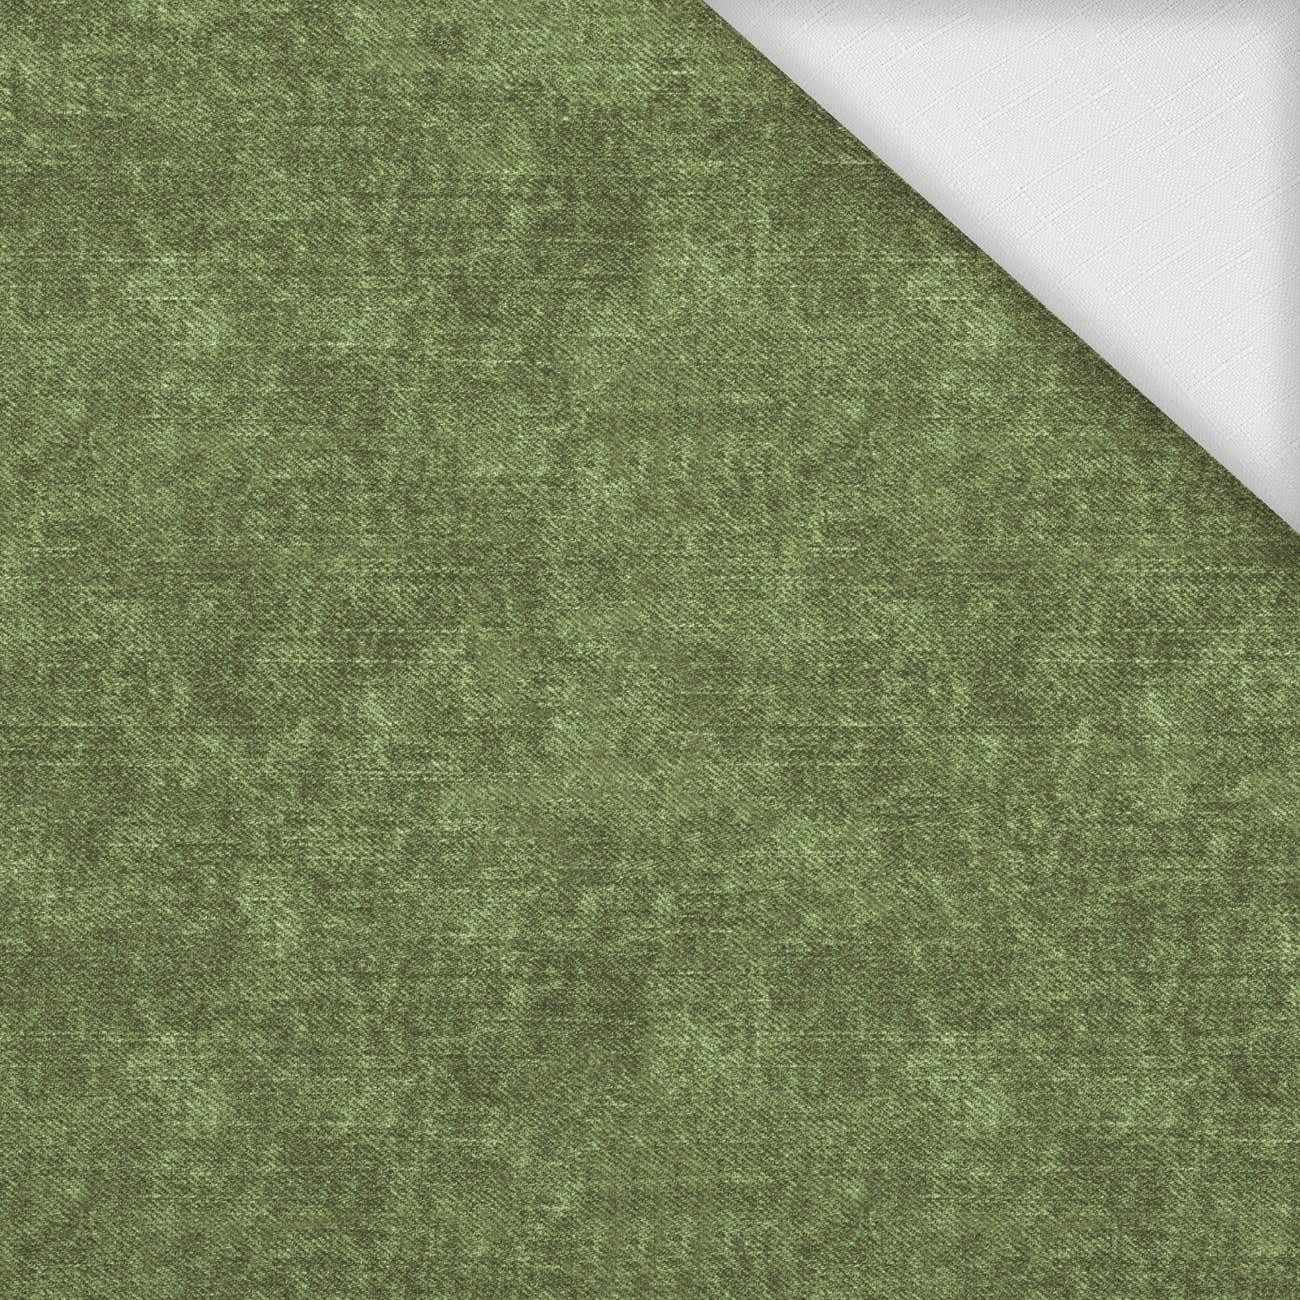 ACID WASH / olive - Woven Fabric for tablecloths